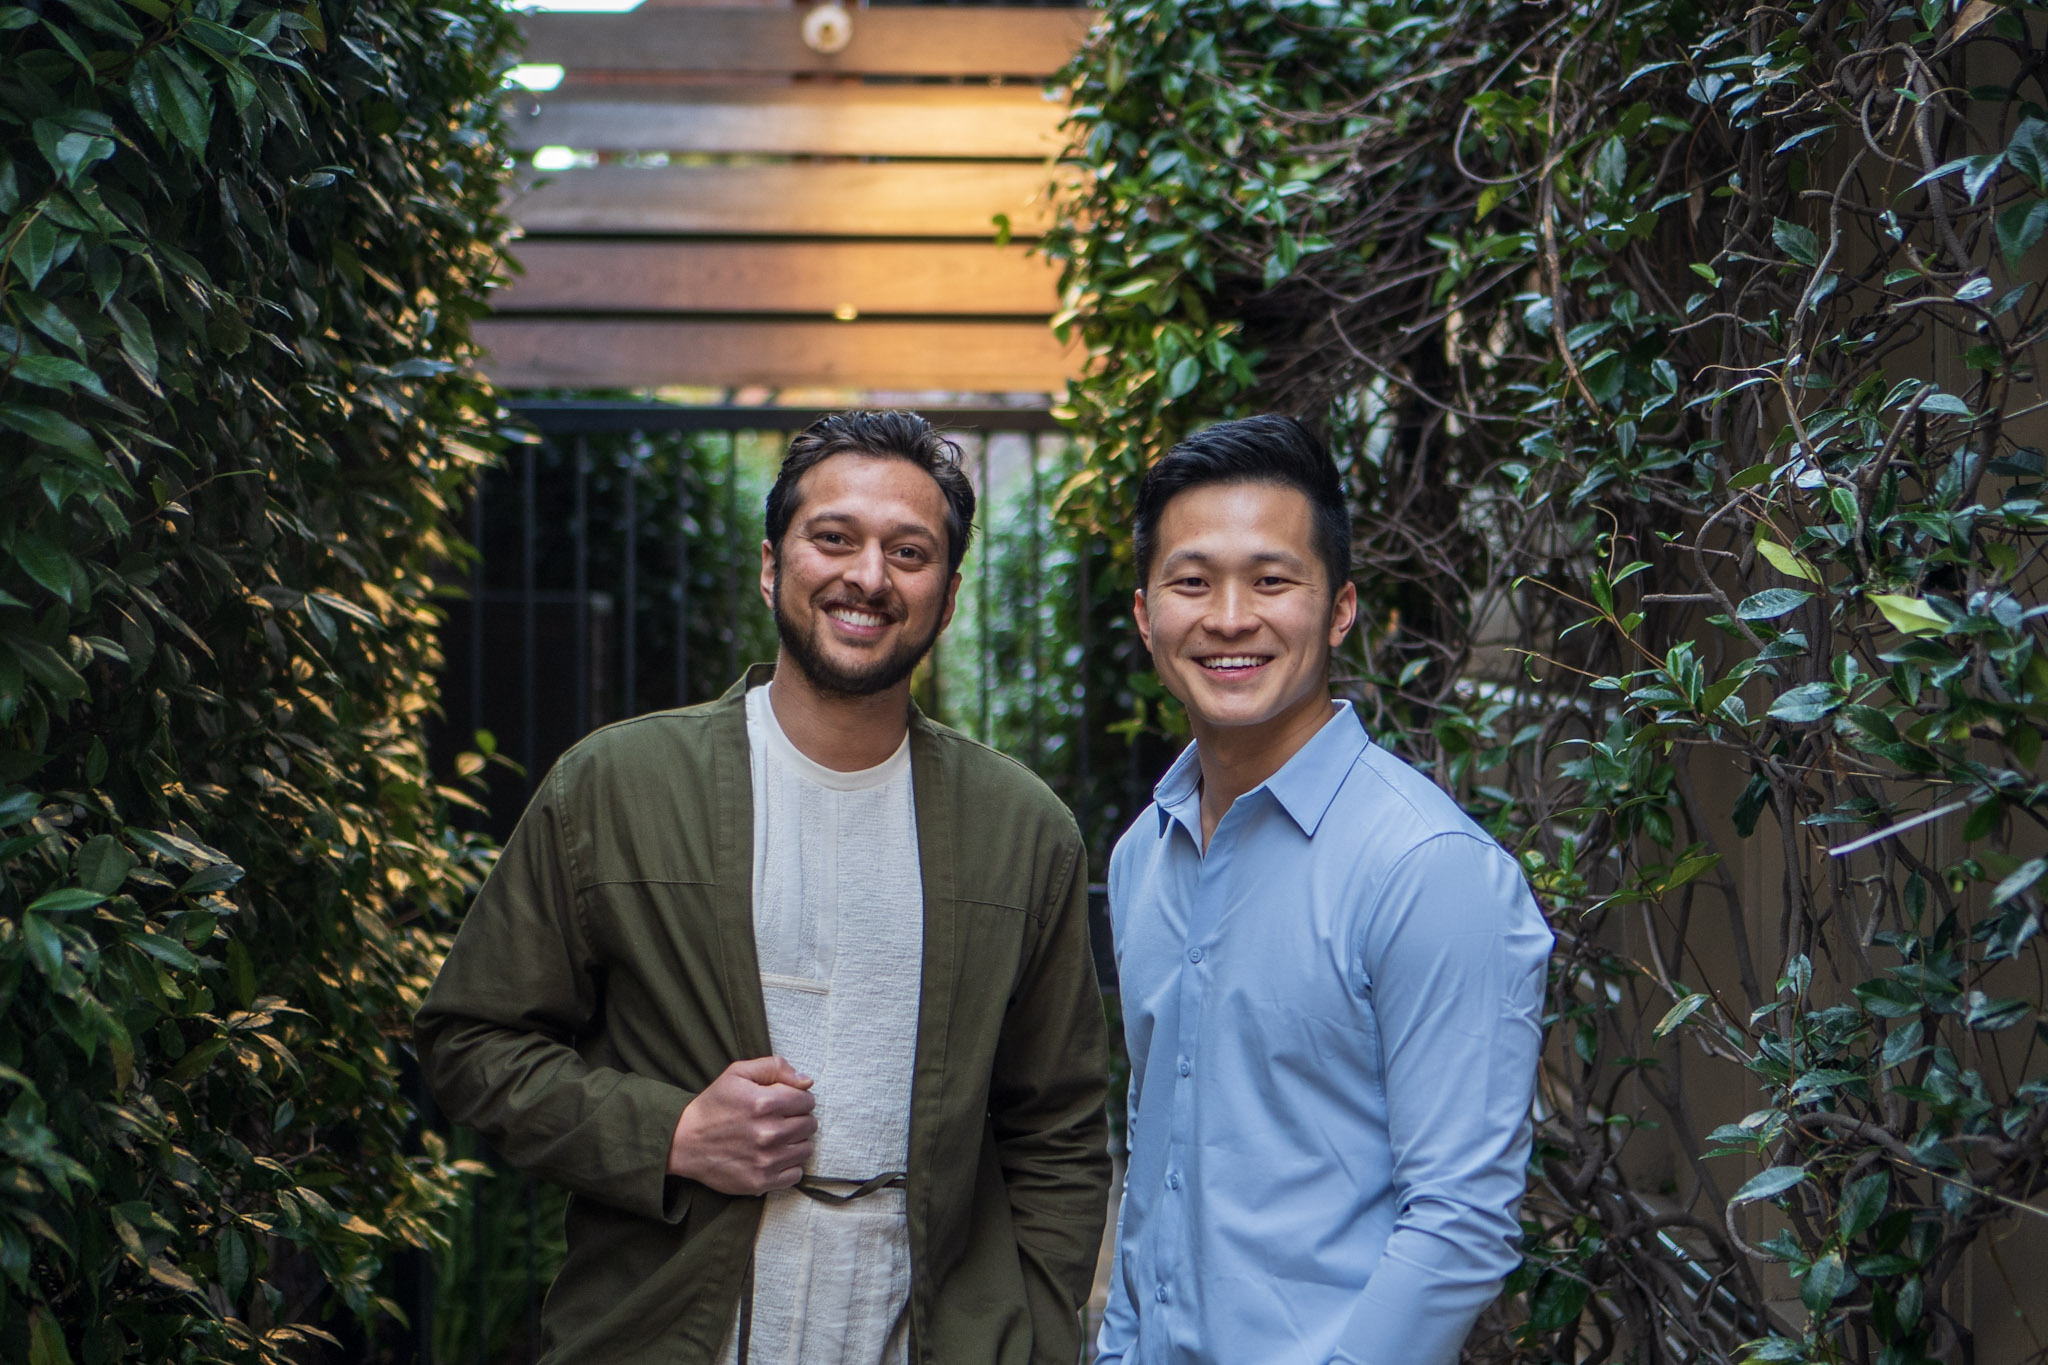 Finch co-founders Ansel Parikh (left) and Jeremy Zhang pose for a photo outside.